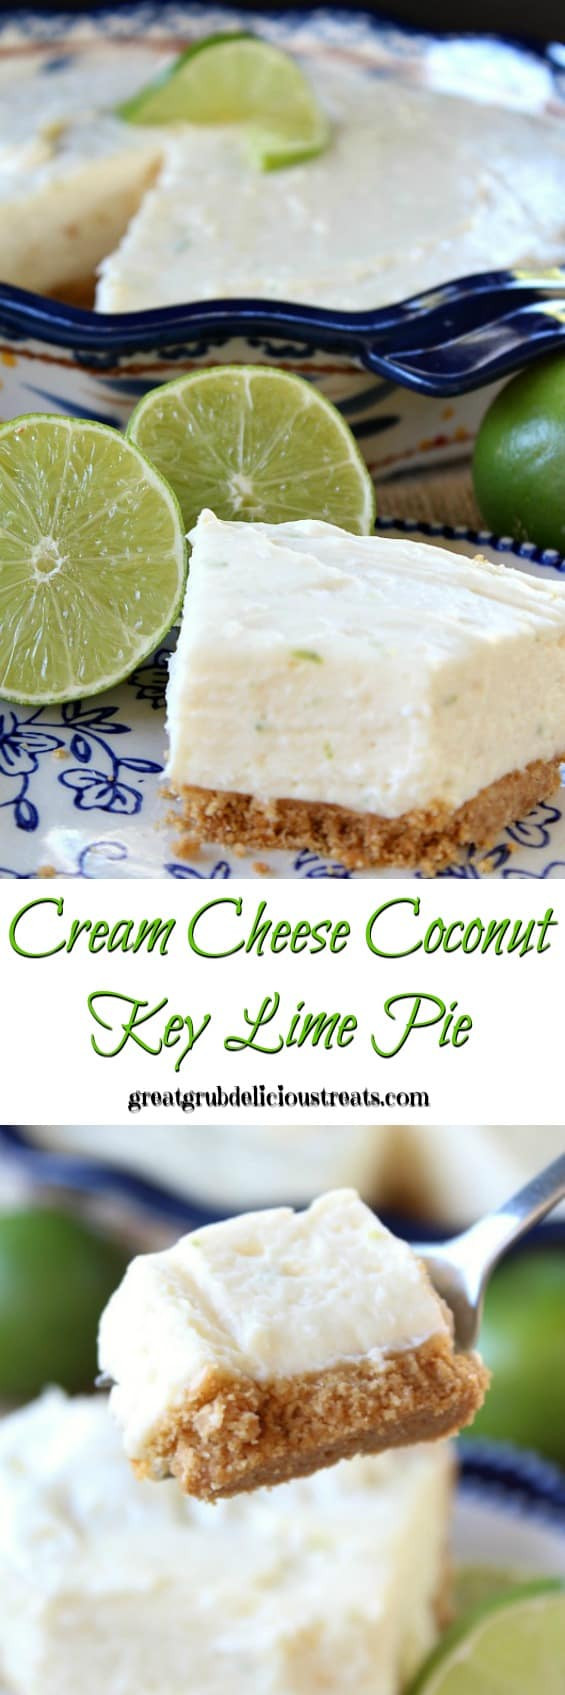 Key Lime Pie With Cream Cheese
 Cream Cheese Coconut Key Lime Pie Great Grub Delicious